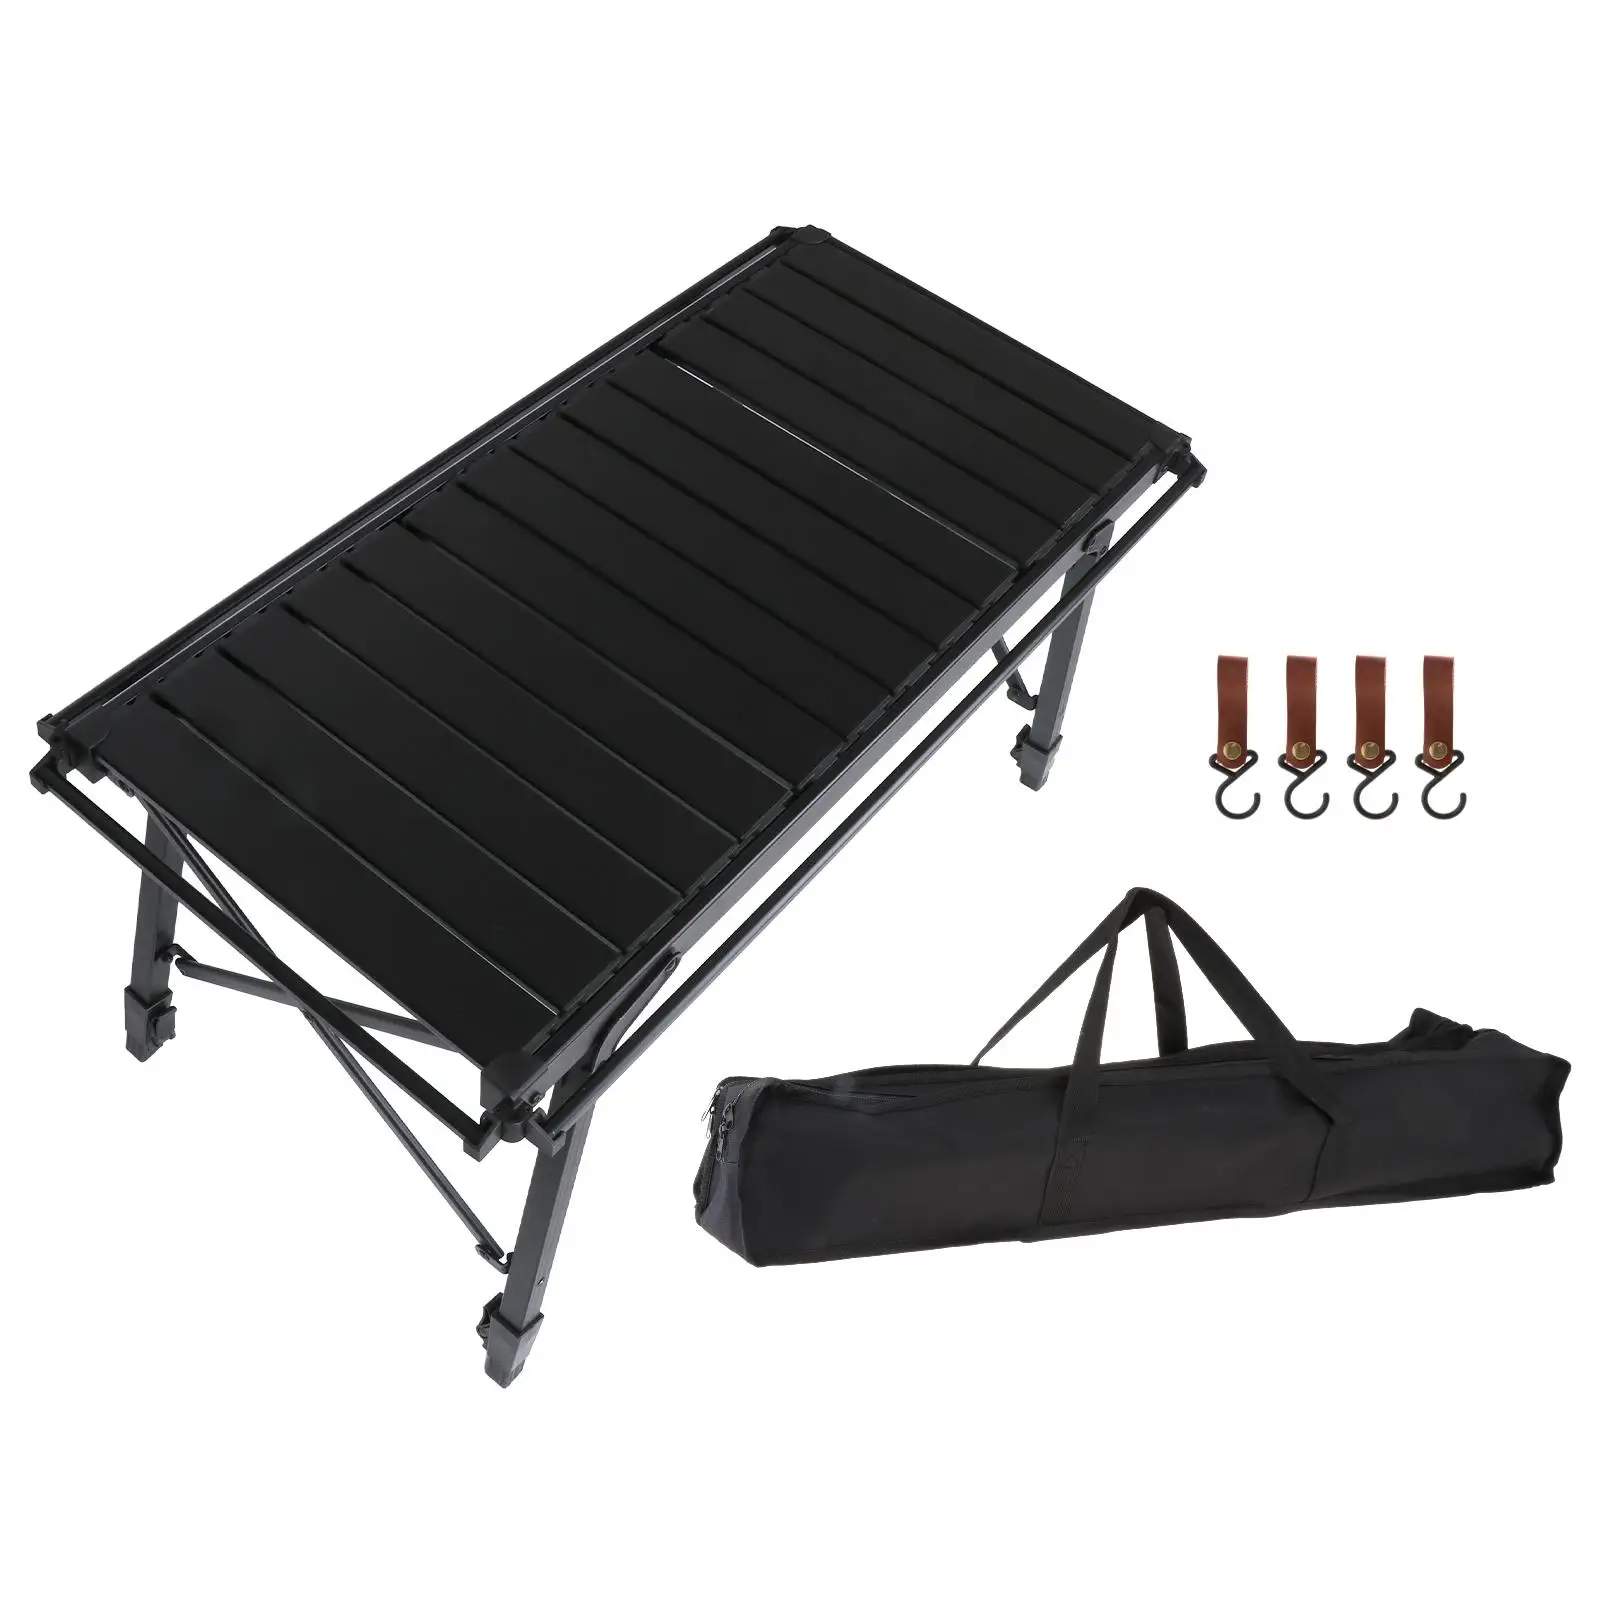 Camping Folding Table Lightweight with Storage Bag Furniture Compact Foldable Picnic Table for Garden Beach Outdoor Kitchen BBQ